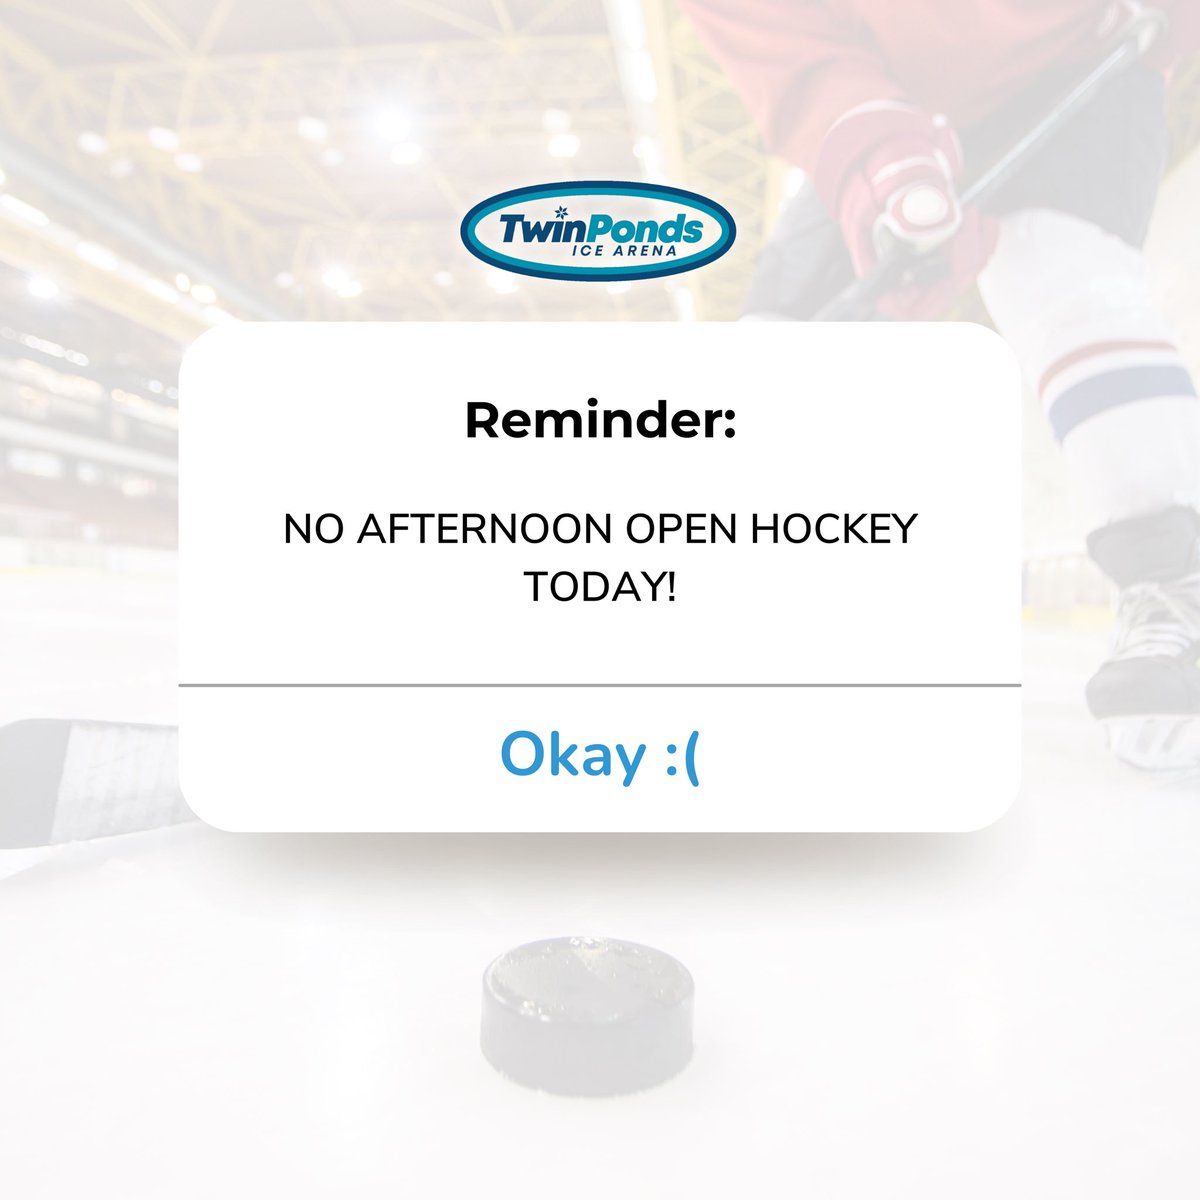 ‼️REMINDER‼️

There will be no open hockey today! #TwinPondsIceArena #HarrisburgPa #publicskating